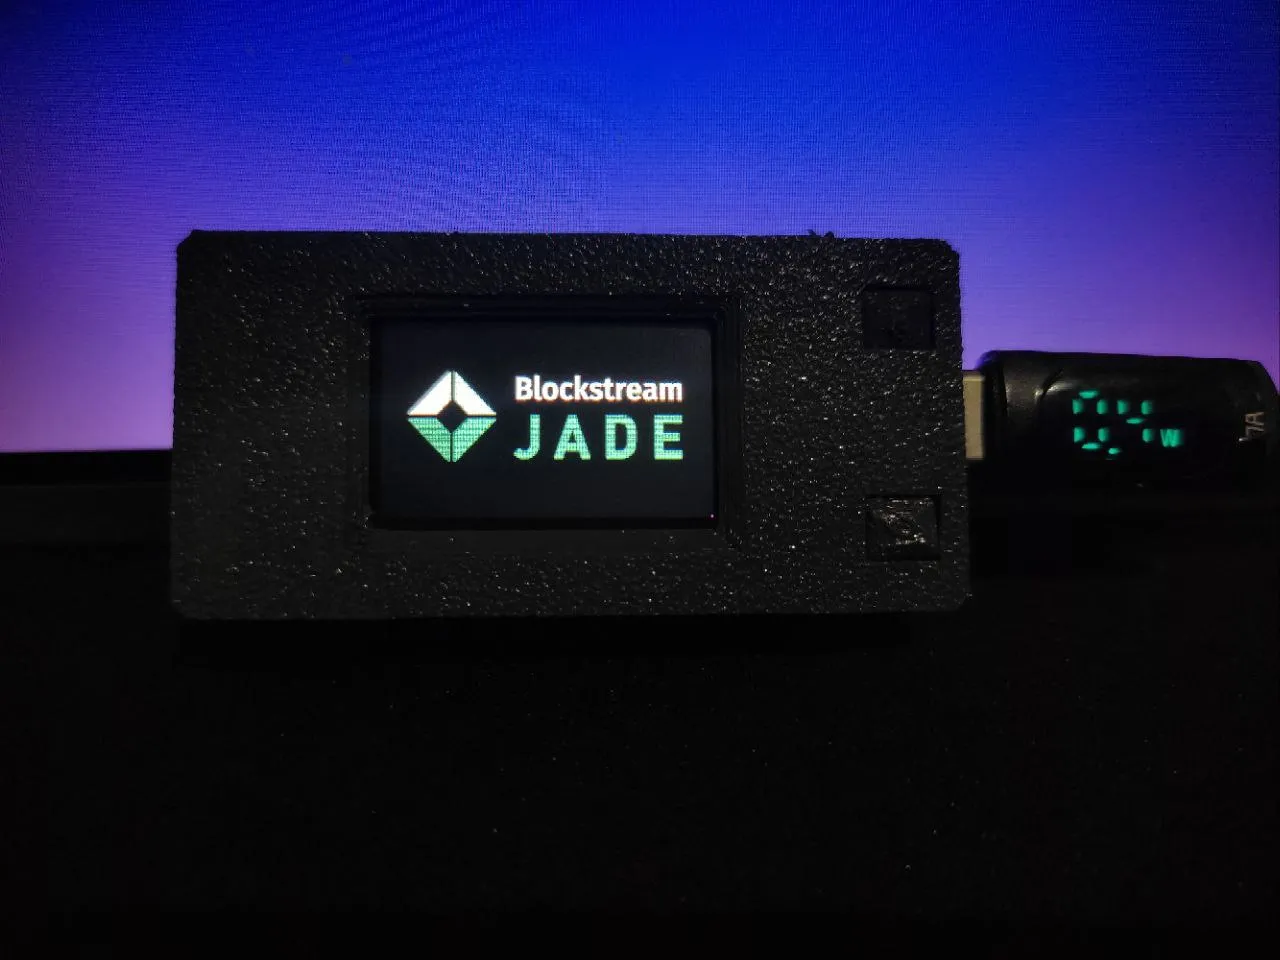 How to set up Blockstream Jade with Green